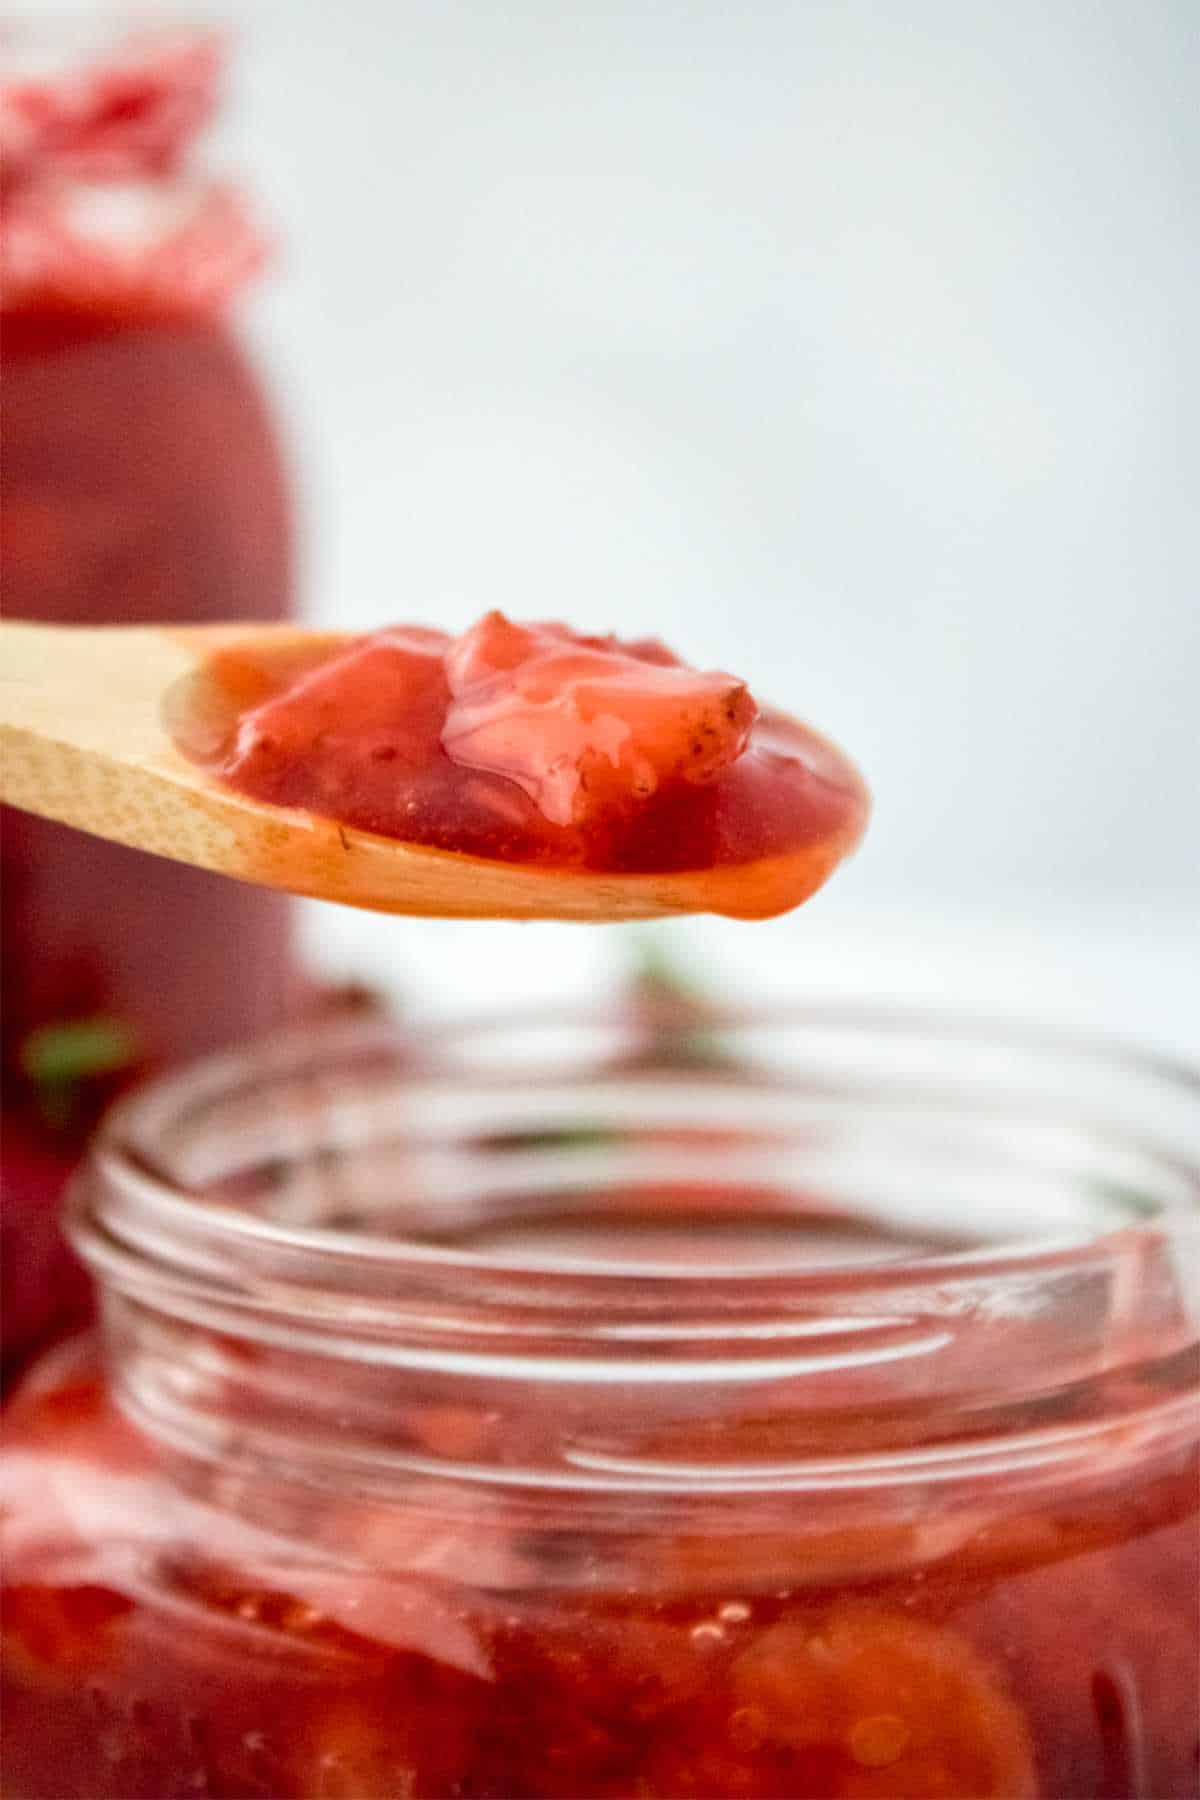 Spooning hot strawberry jam into a jar.